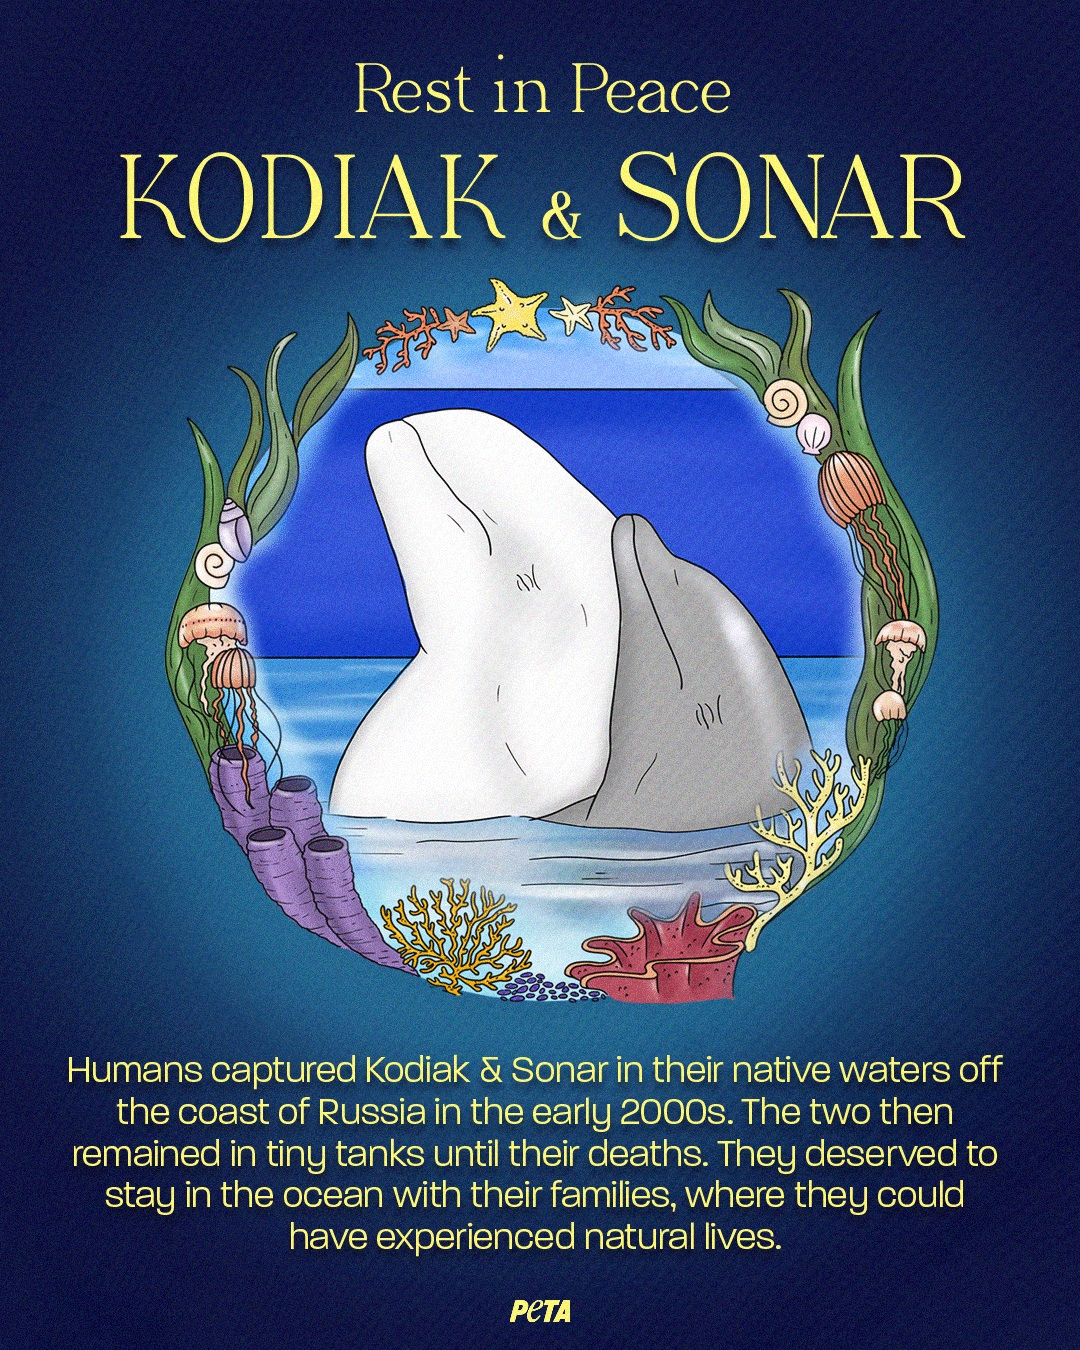 decorative image remembering two cetaceans who died at Marineland of Canada in May 2023